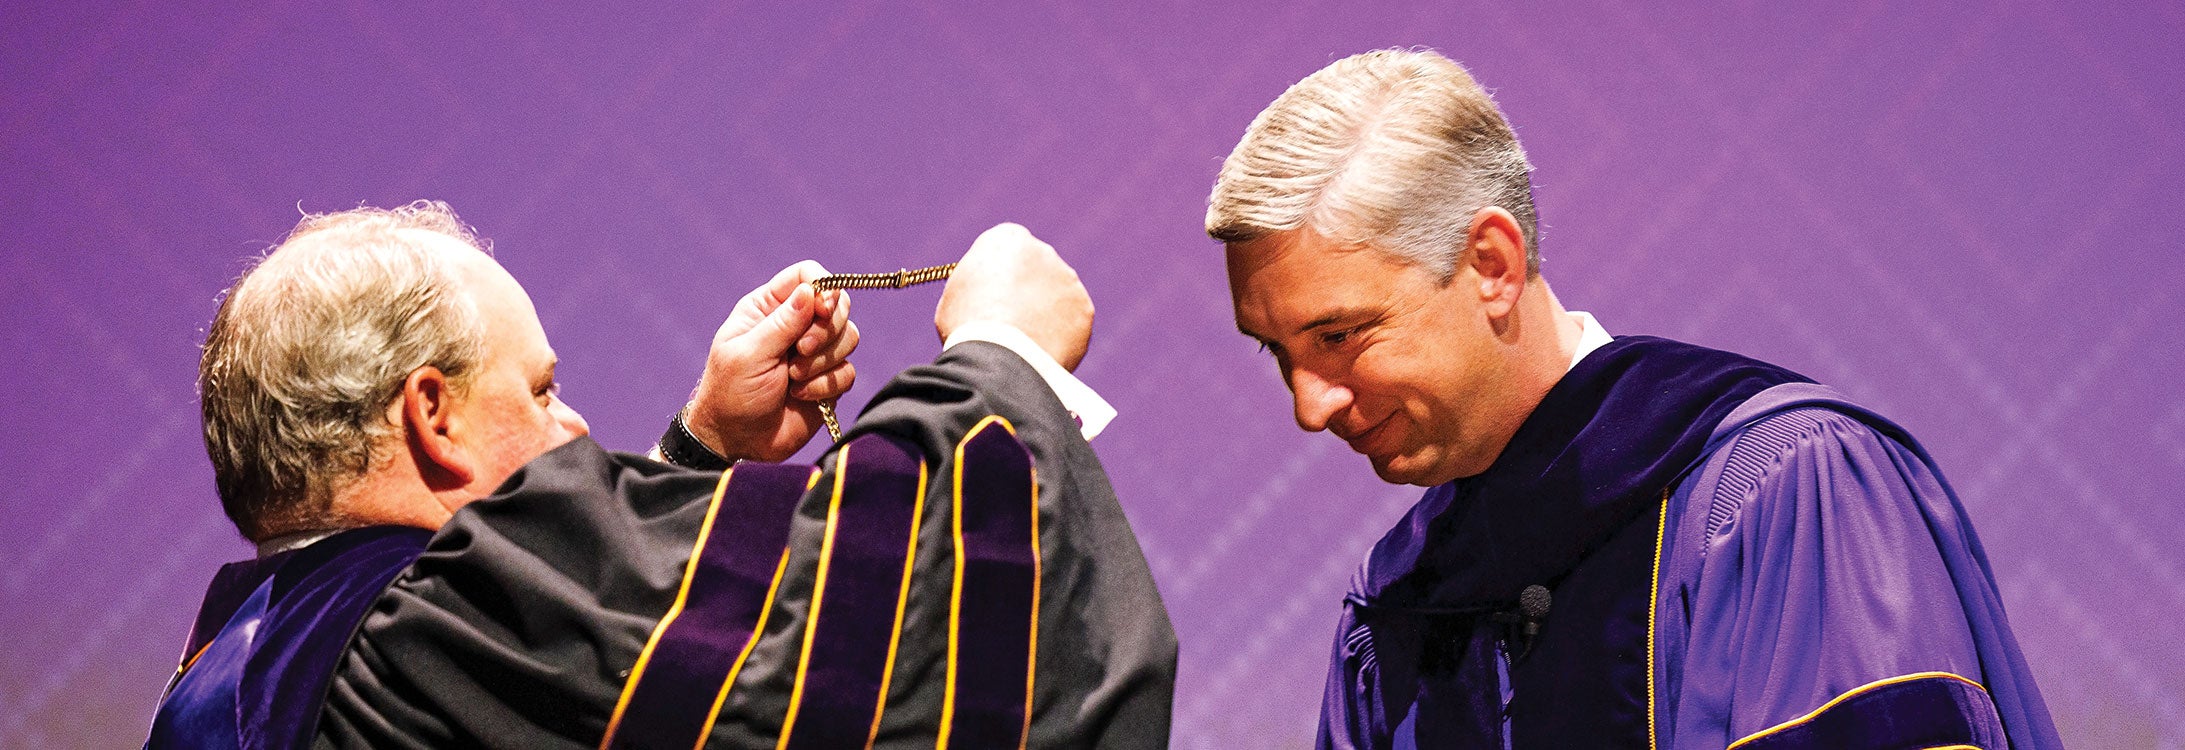 Scott Shook, chair of the ECU board of trustees, puts the Chancellor’s Medallion on Chancellor Philip Rogers